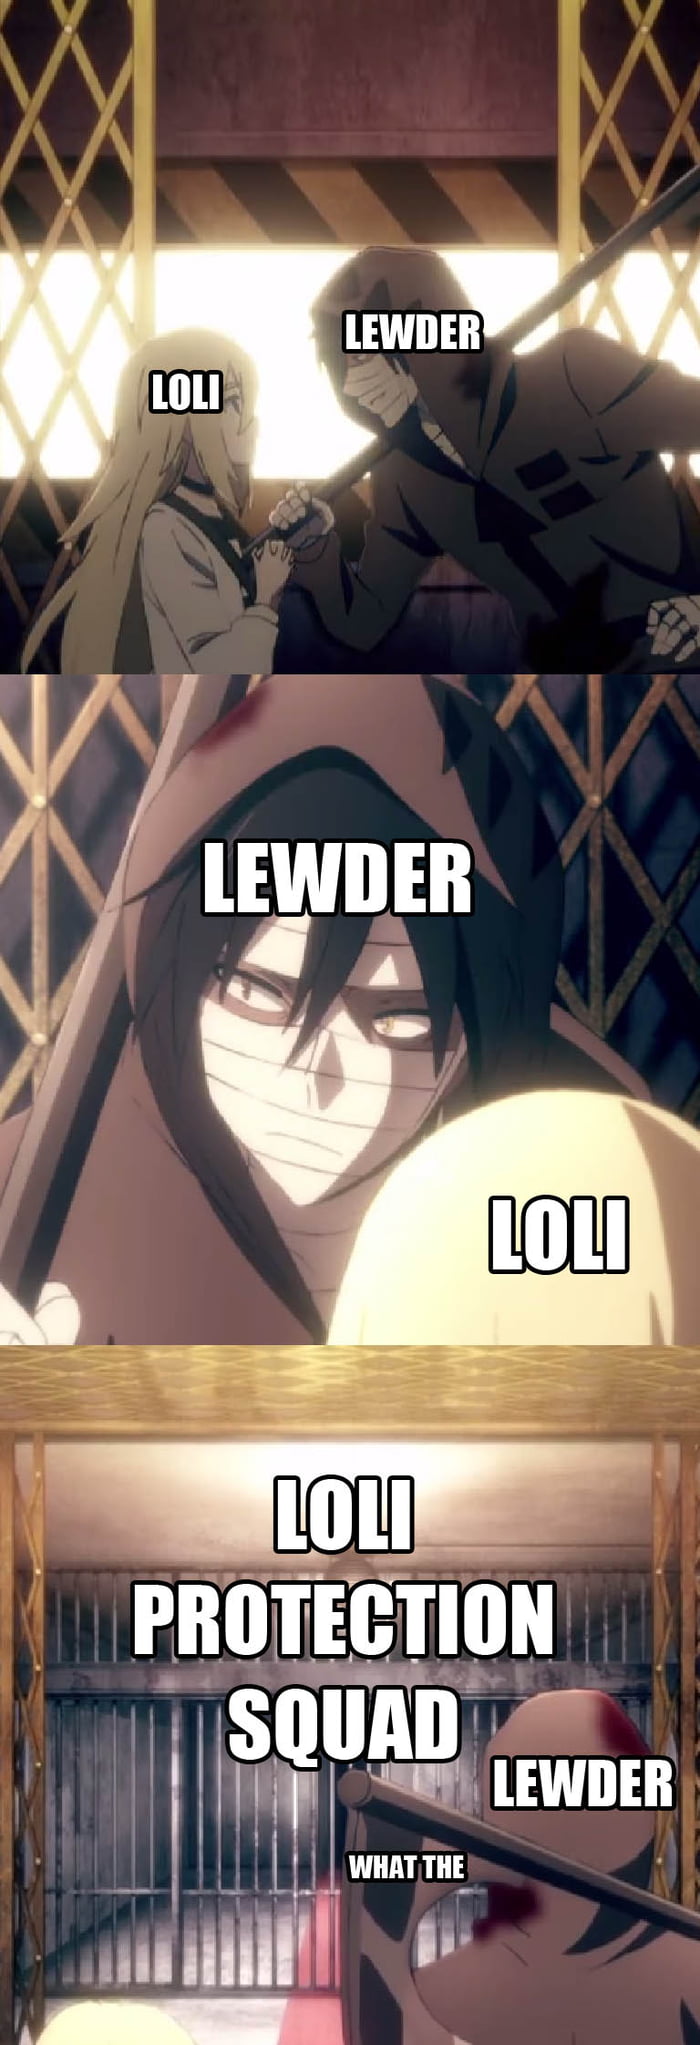 We have to go lewder